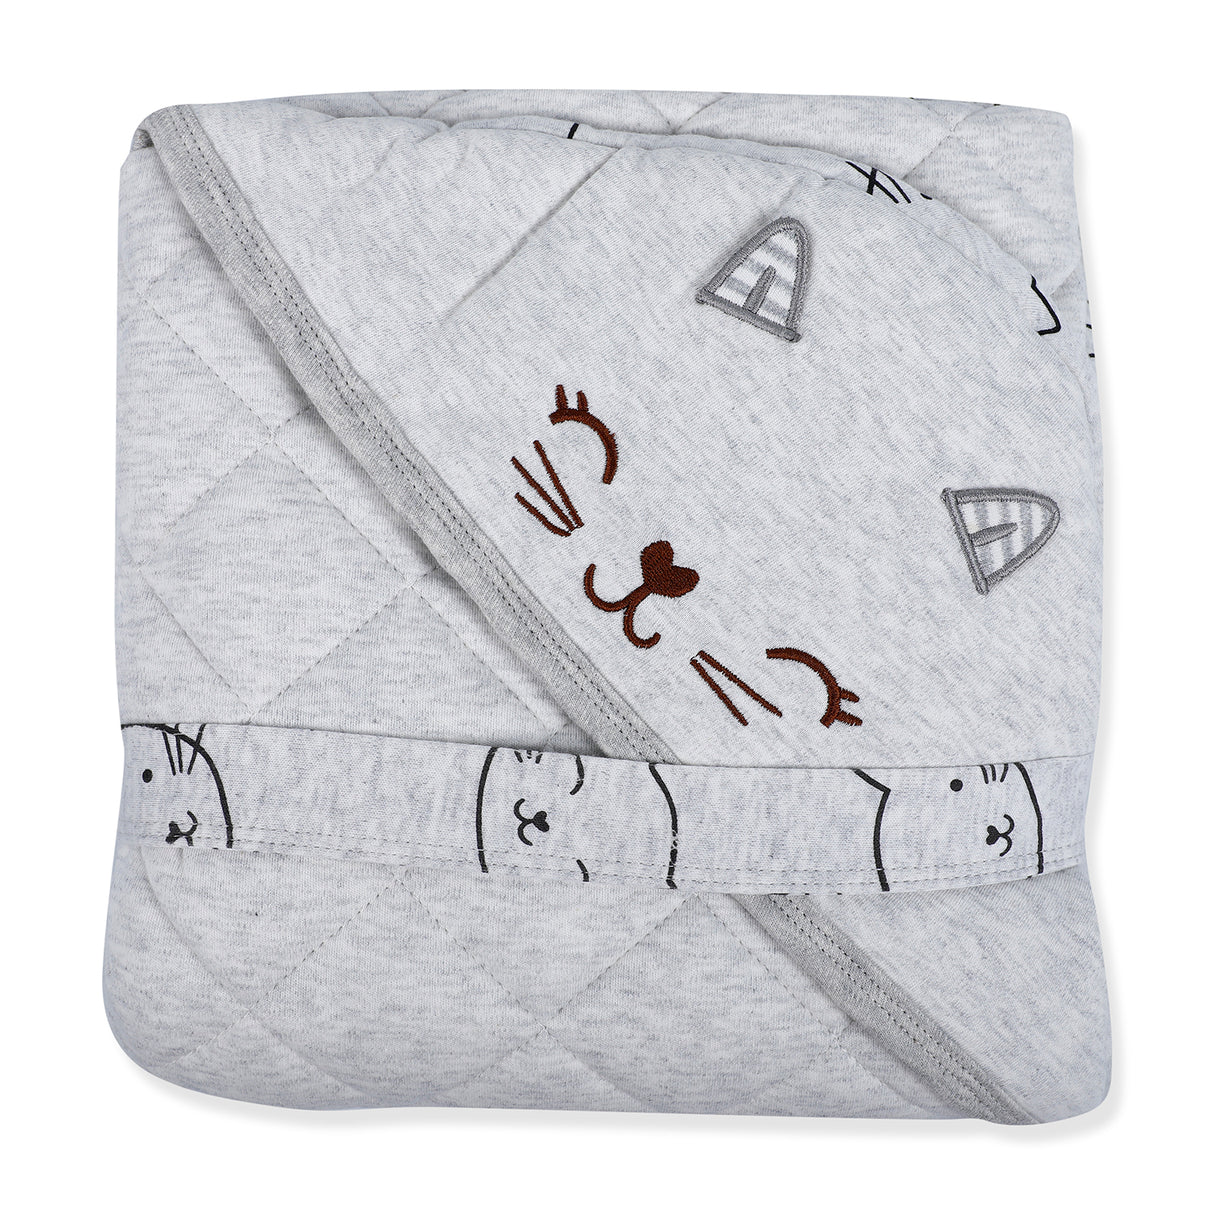 Moms Care Comfy Hooded Cotton Wrapper